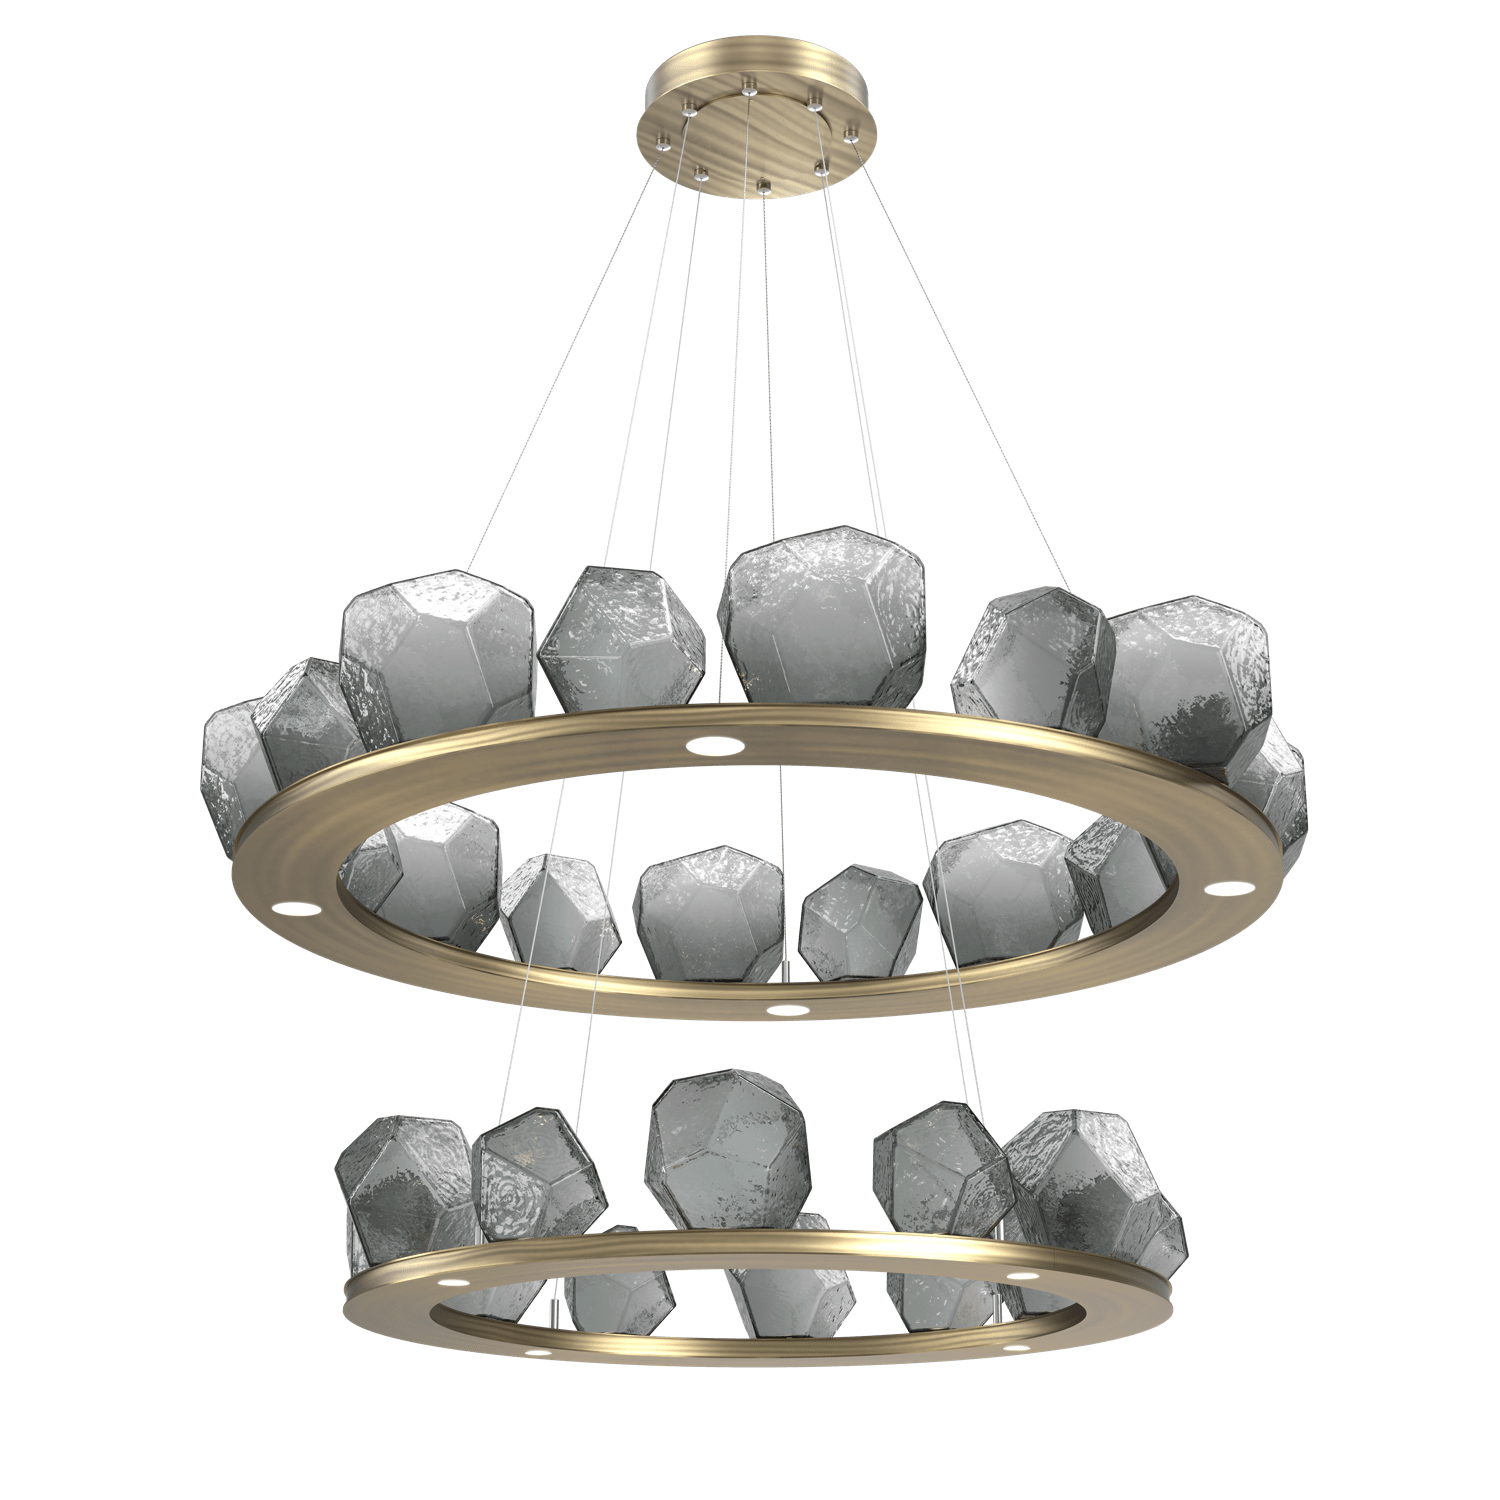 CHB0039-2B-HB-S-Hammerton-Studio-Gem-48-inch-two-tier-ring-chandelier-with-heritage-brass-finish-and-smoke-blown-glass-shades-and-LED-lamping